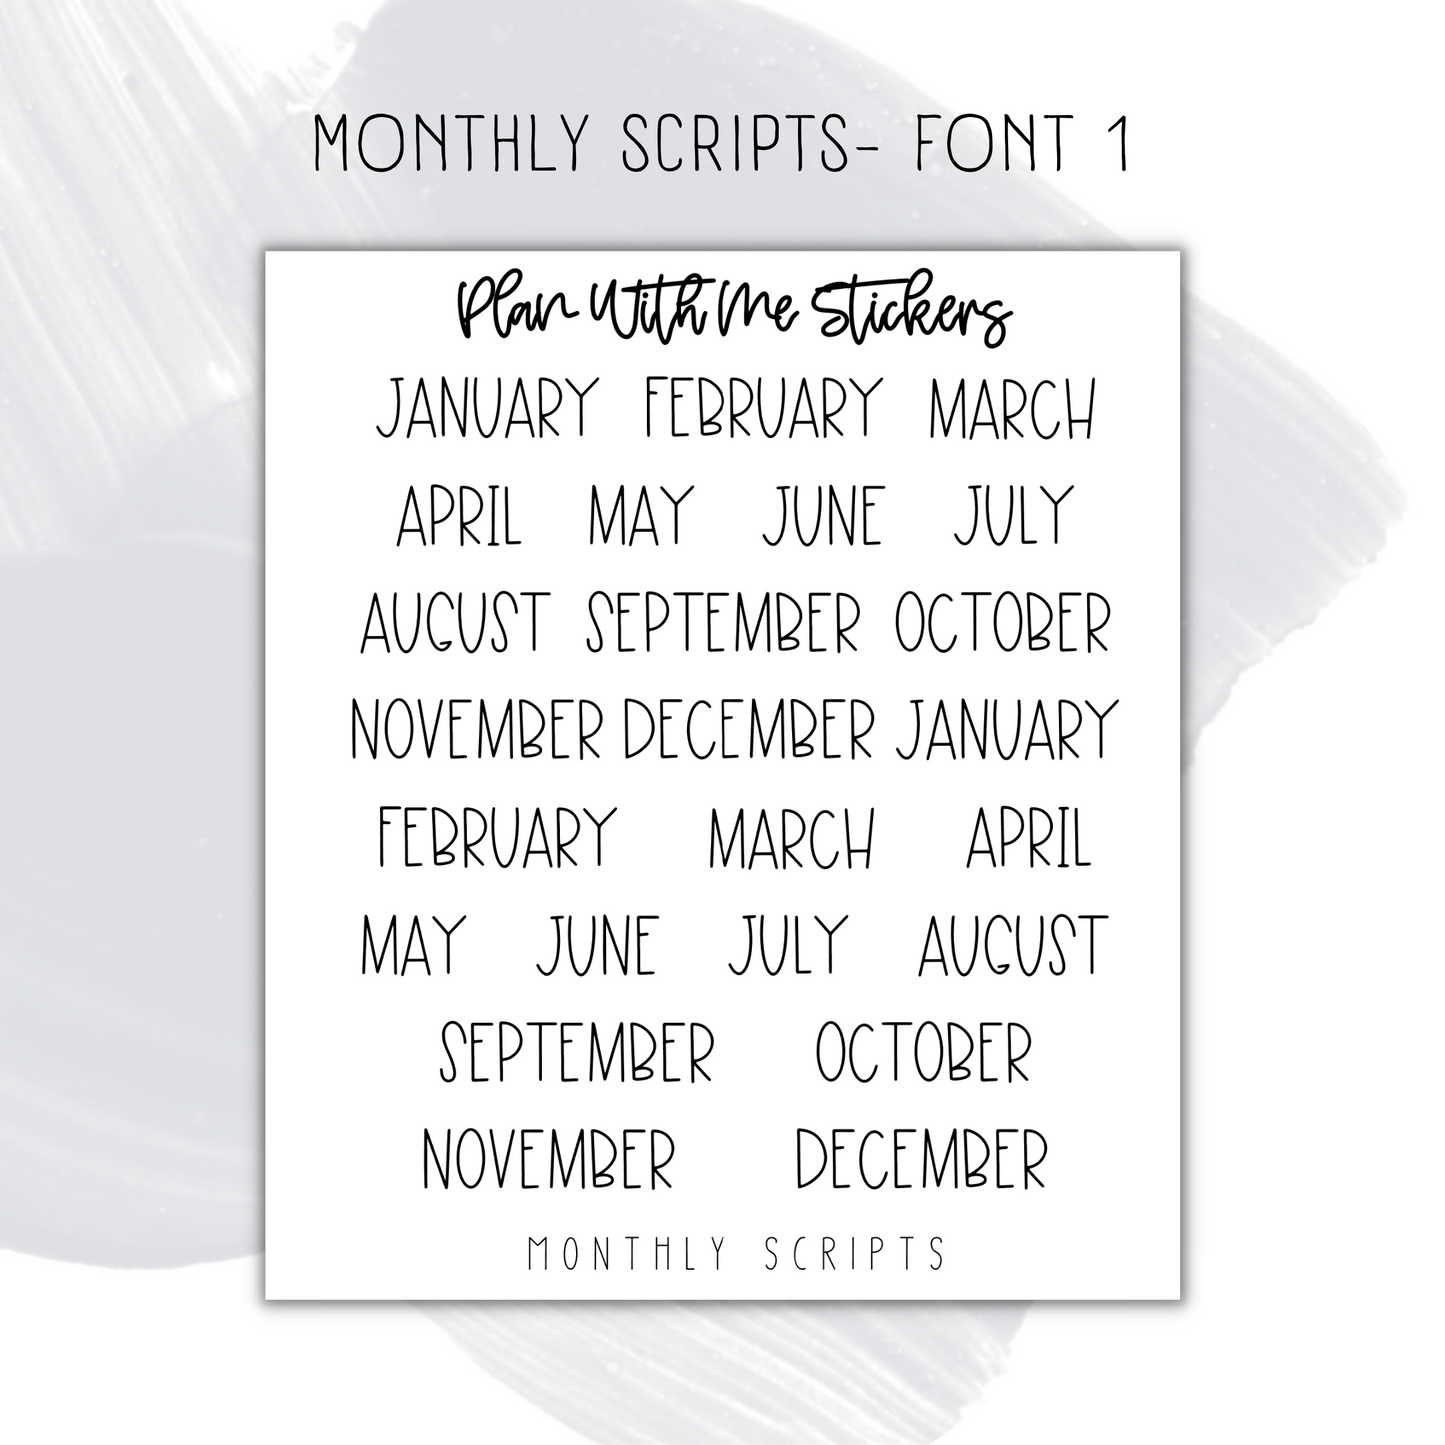 Monthly Scripts- Font 1